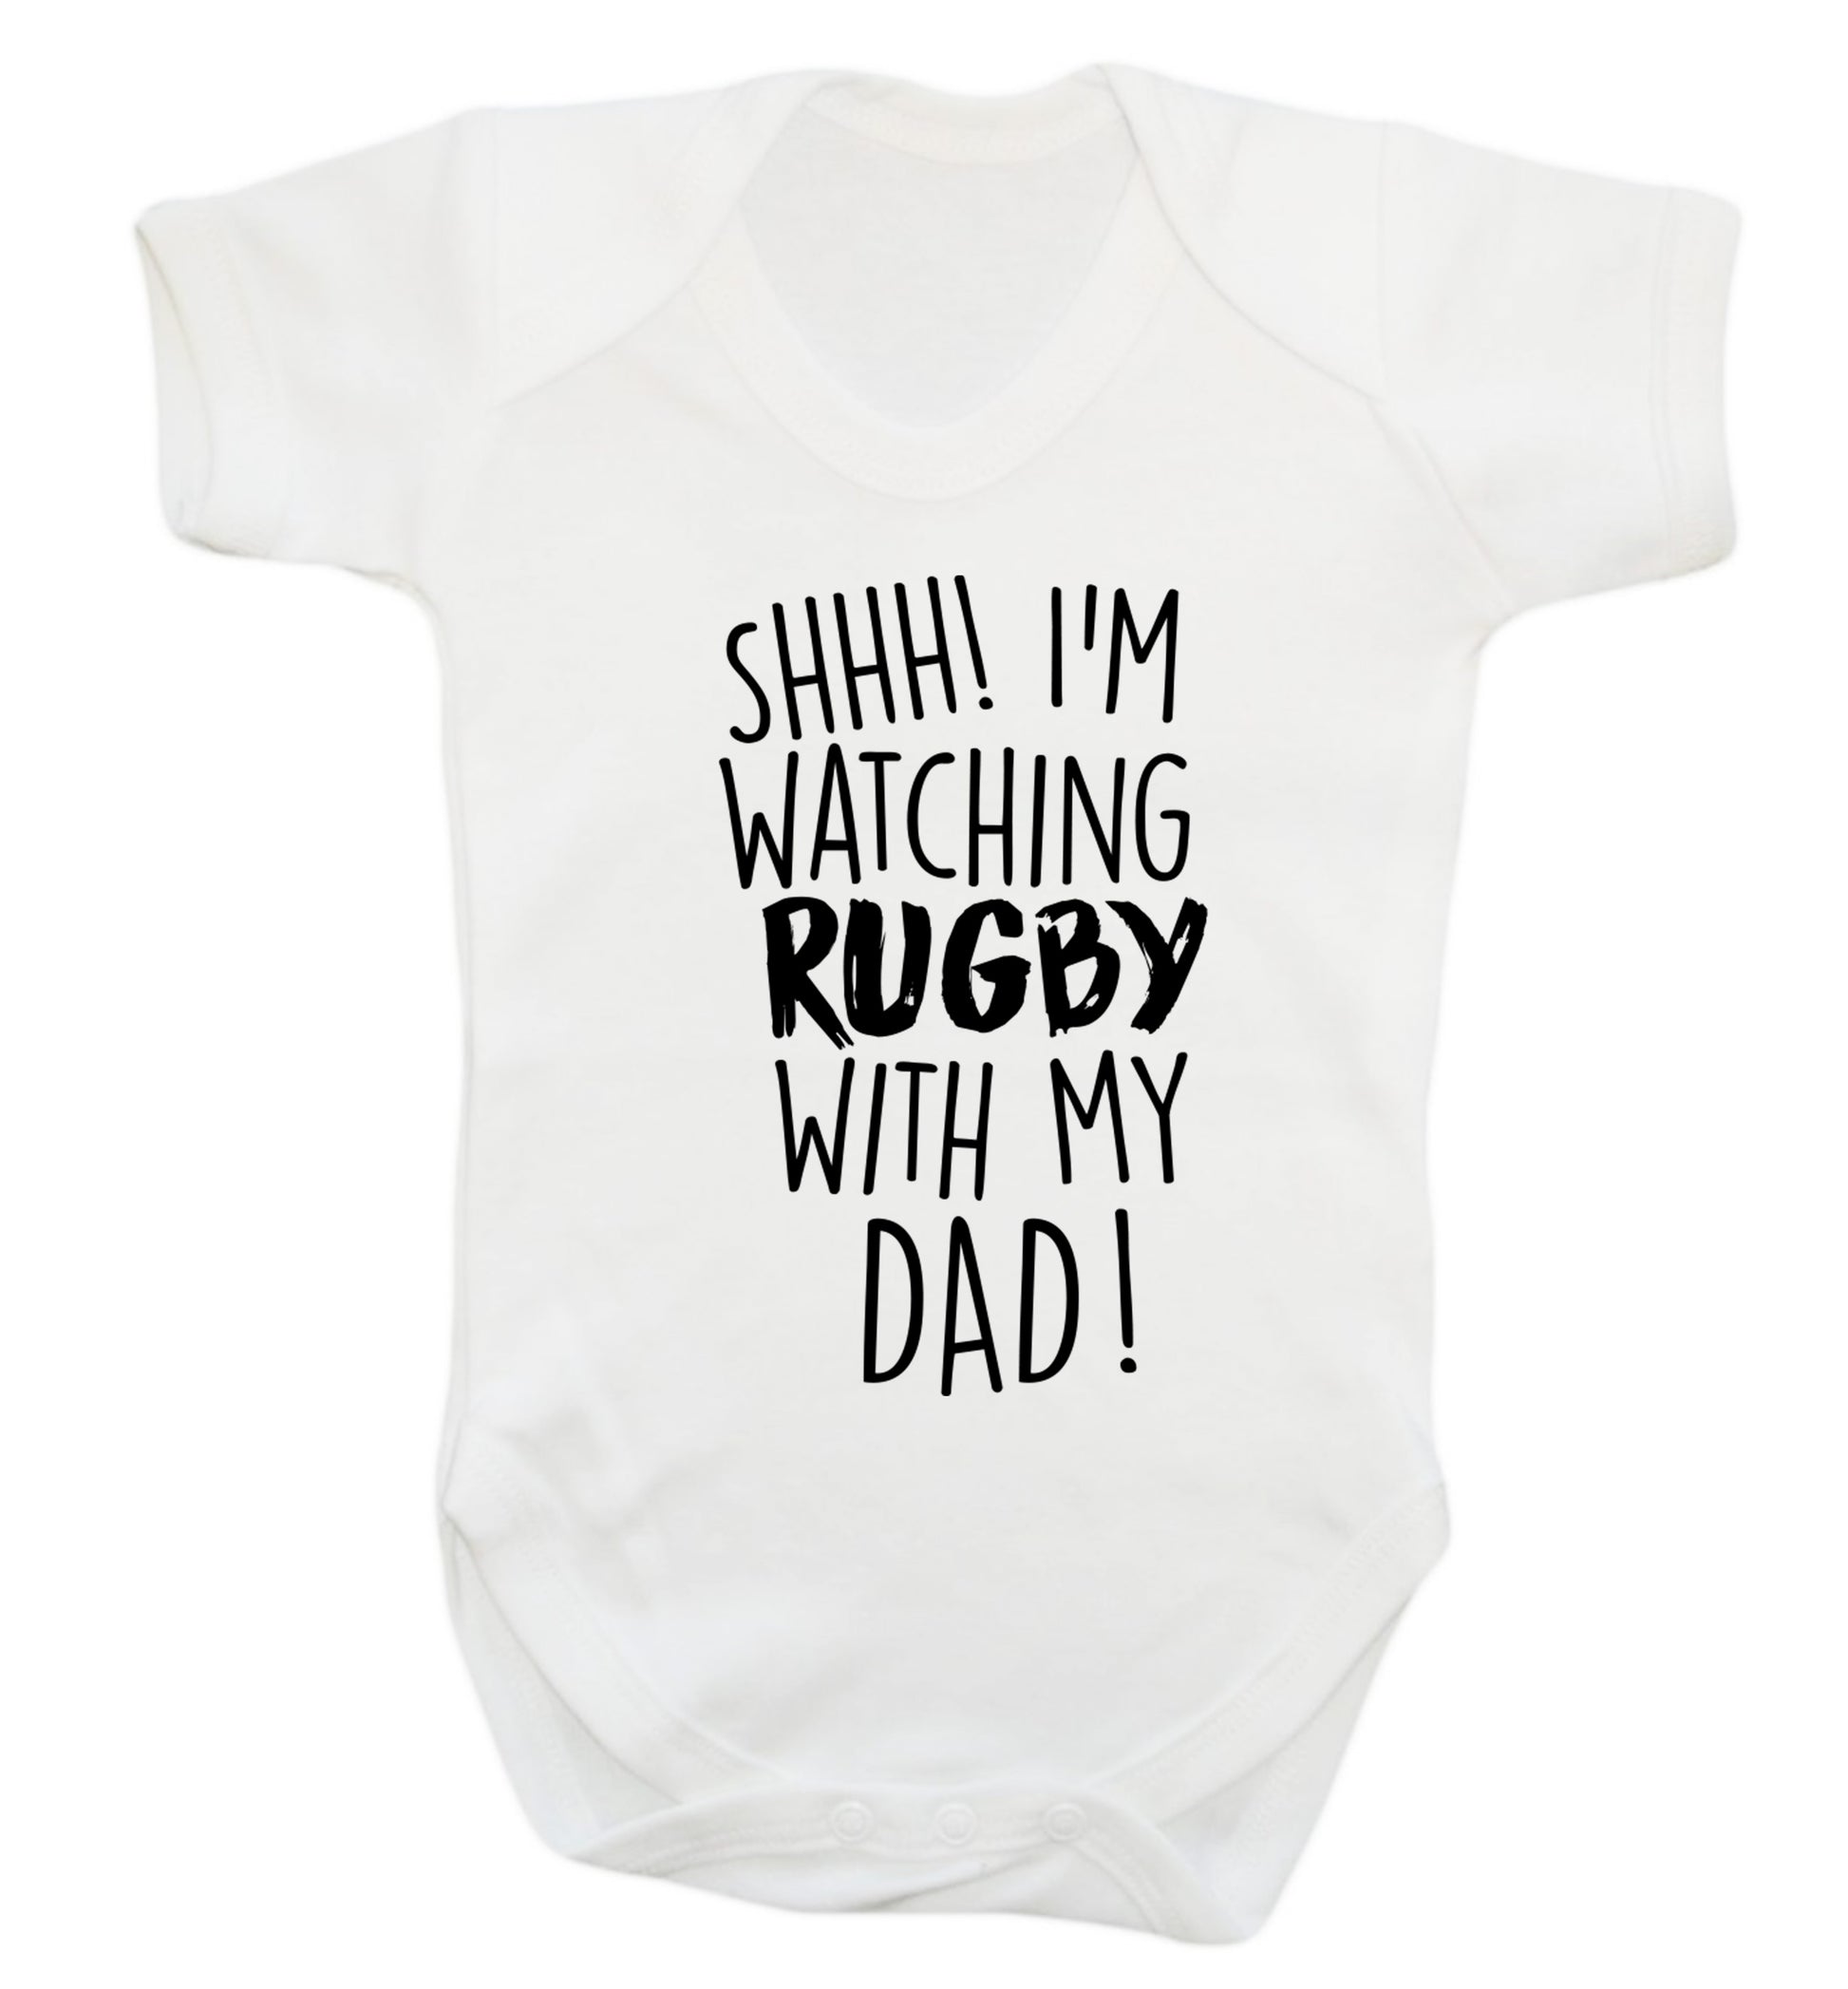 Shh... I'm watching rugby with my dad Baby Vest white 18-24 months